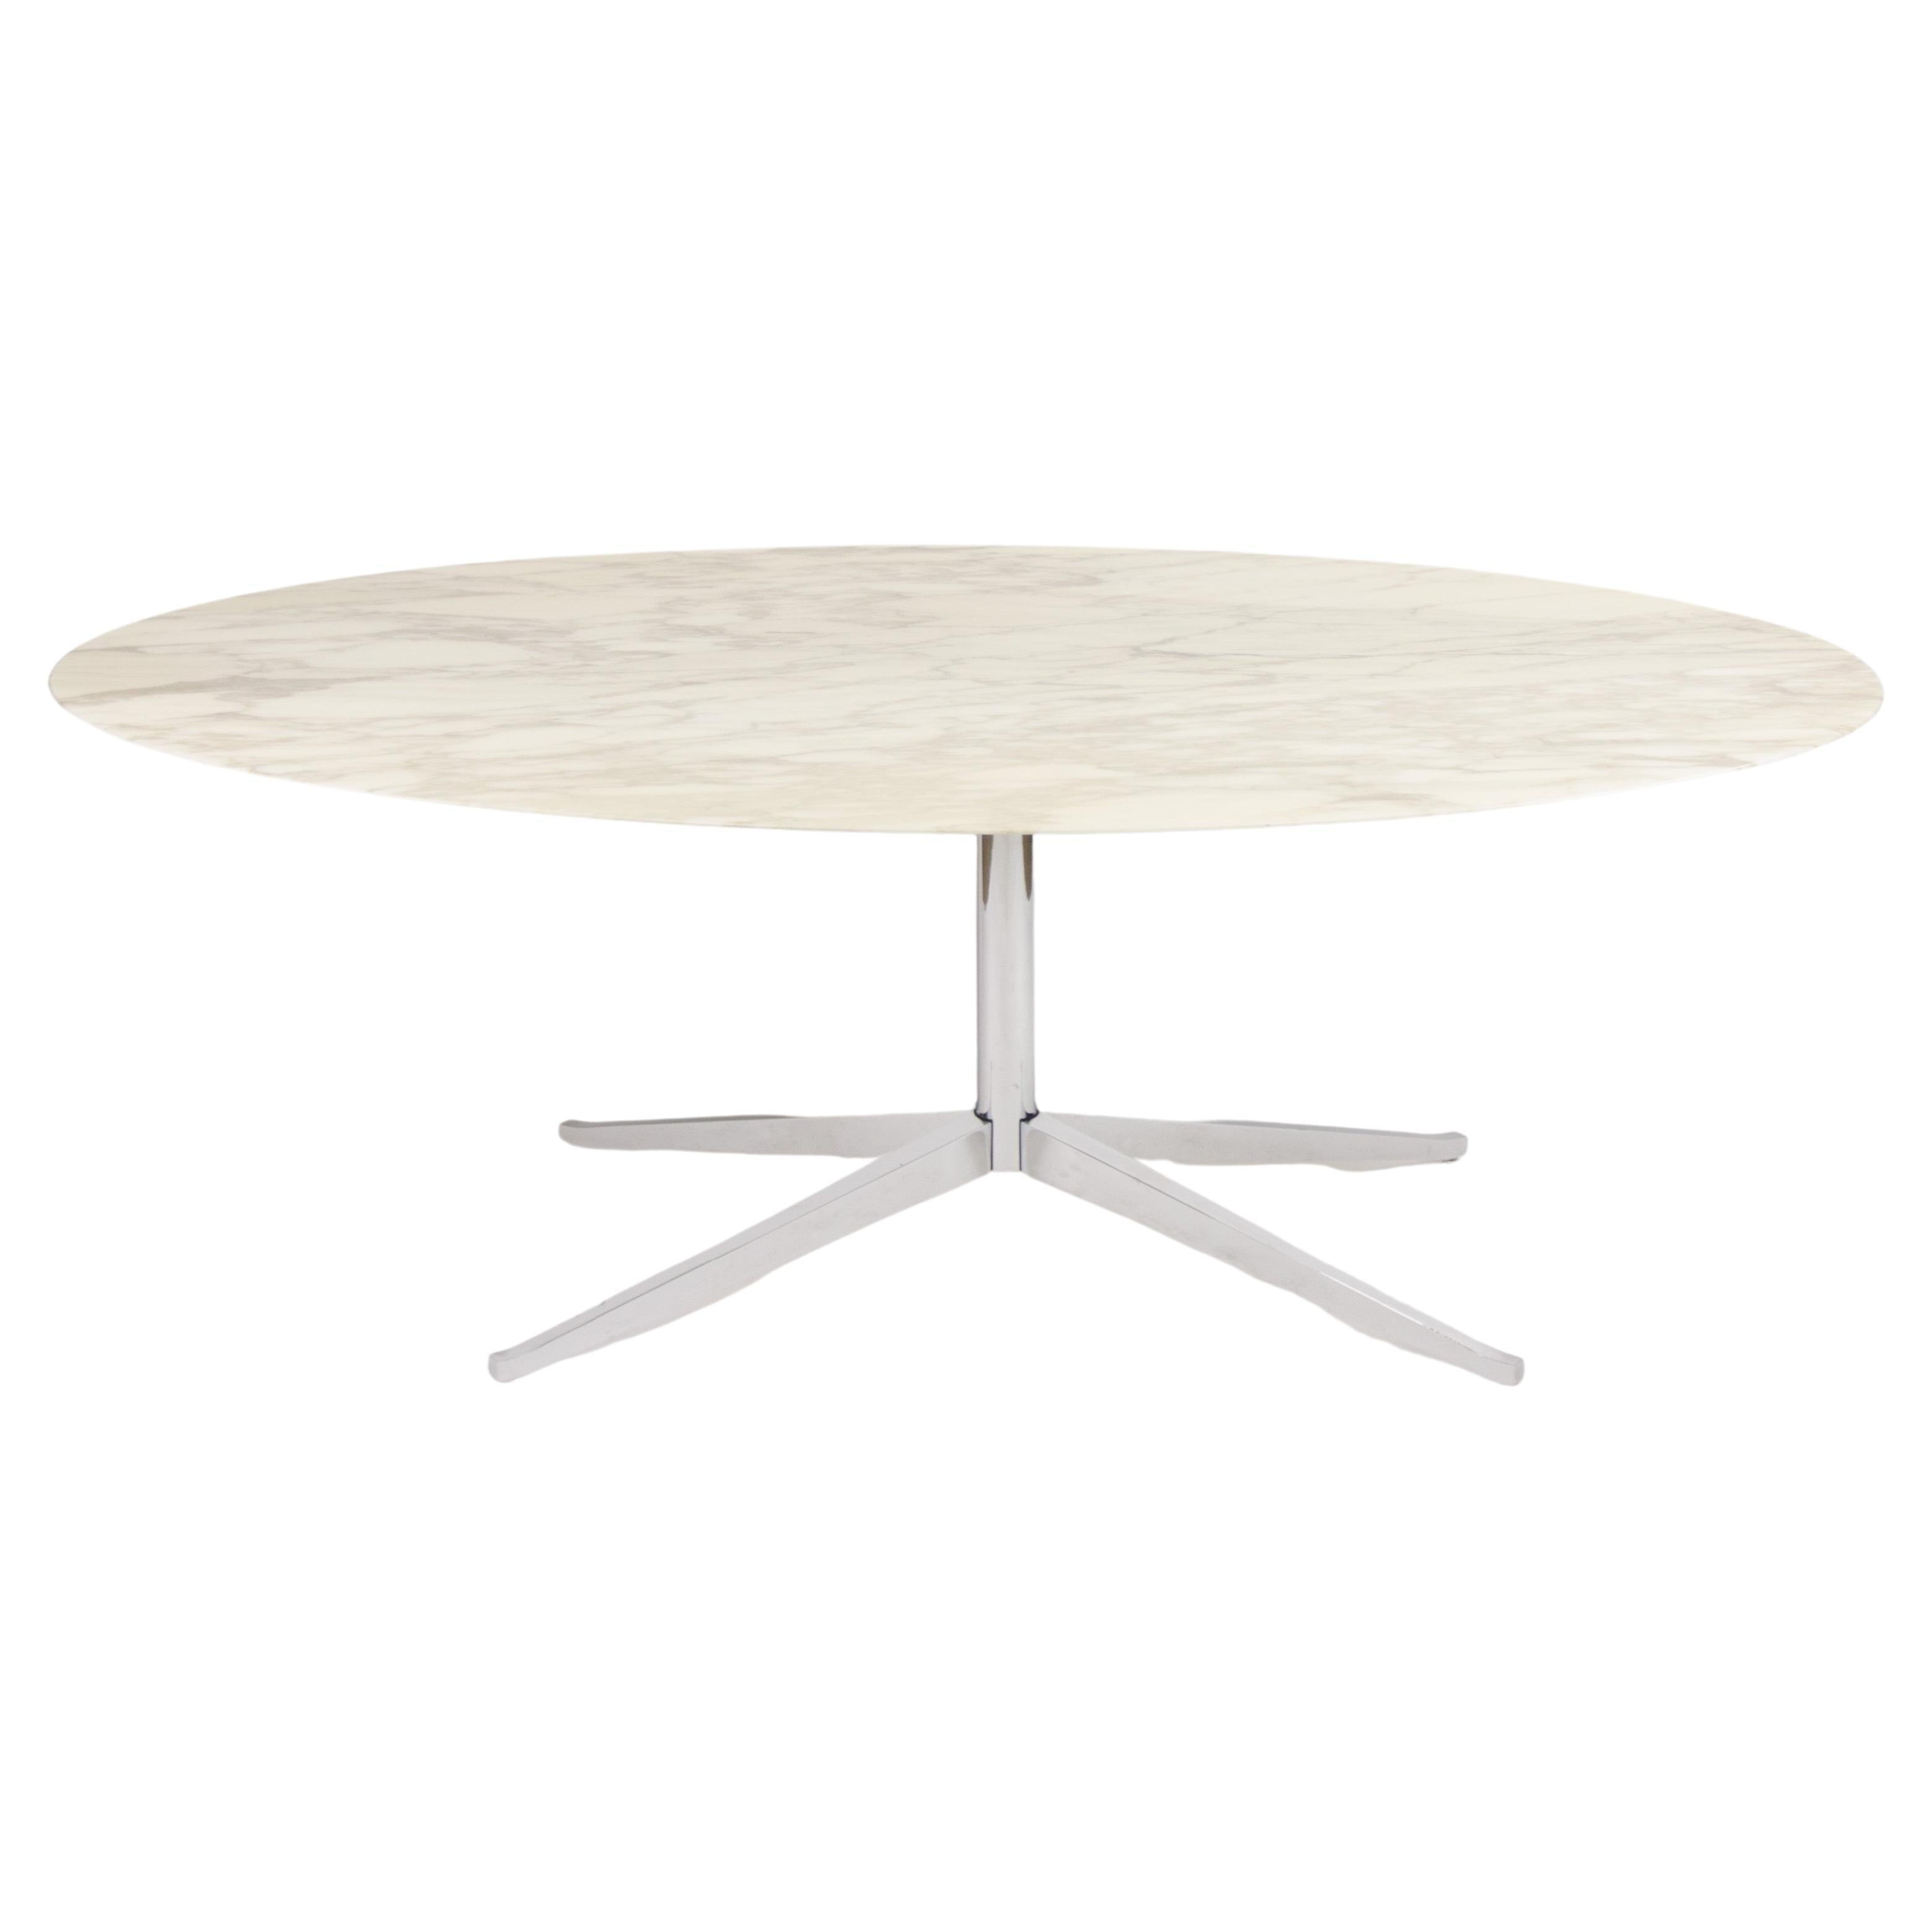 2007 Florence Knoll 78 in Calacatta Marble Dining Conference Table 2x Available en vente